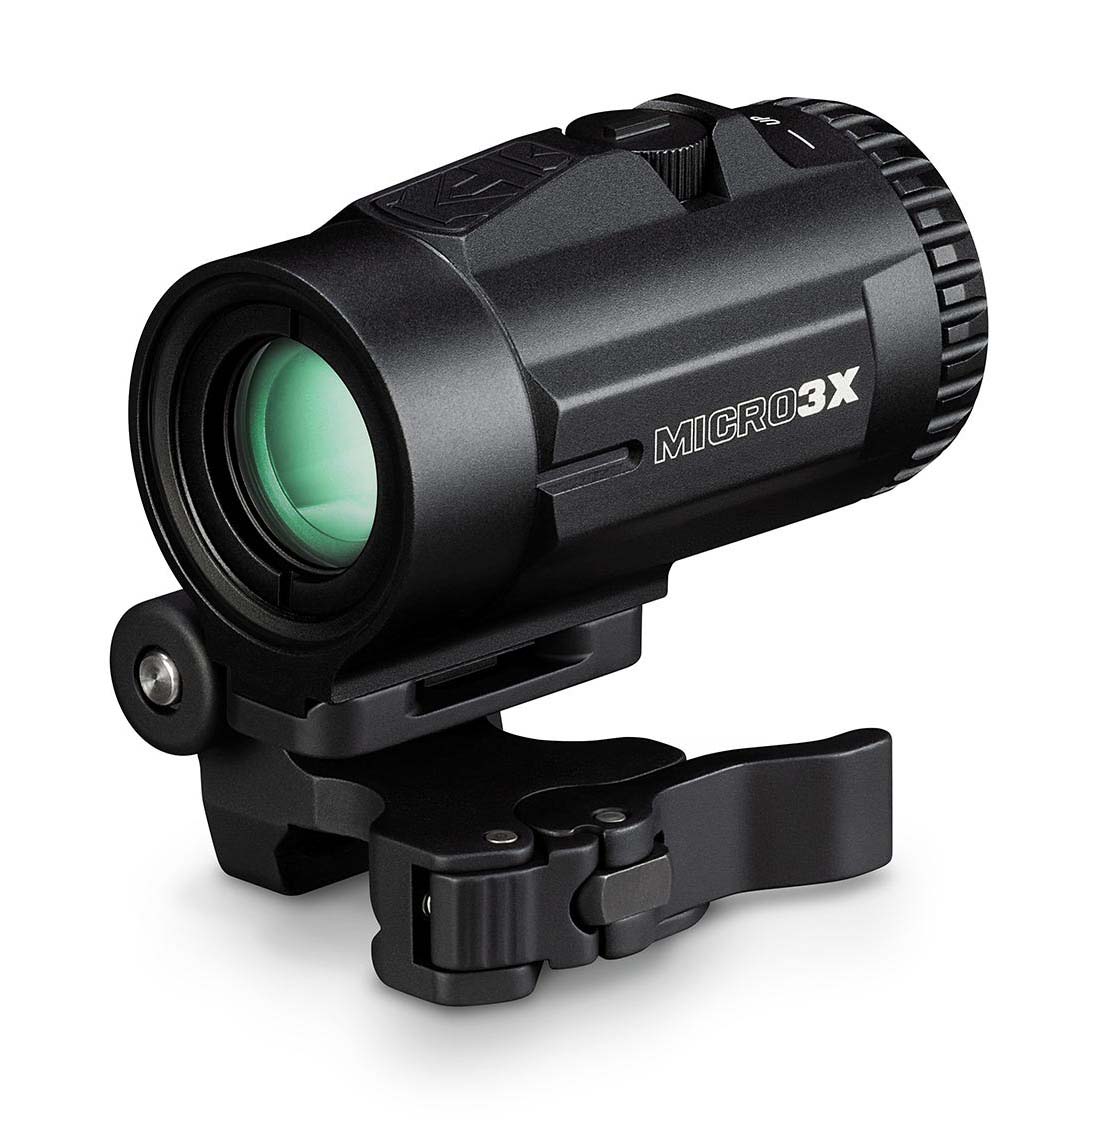 Vortex Micro 3x22mm Magnifier | 4.5 Star Rating w/ Free S&H